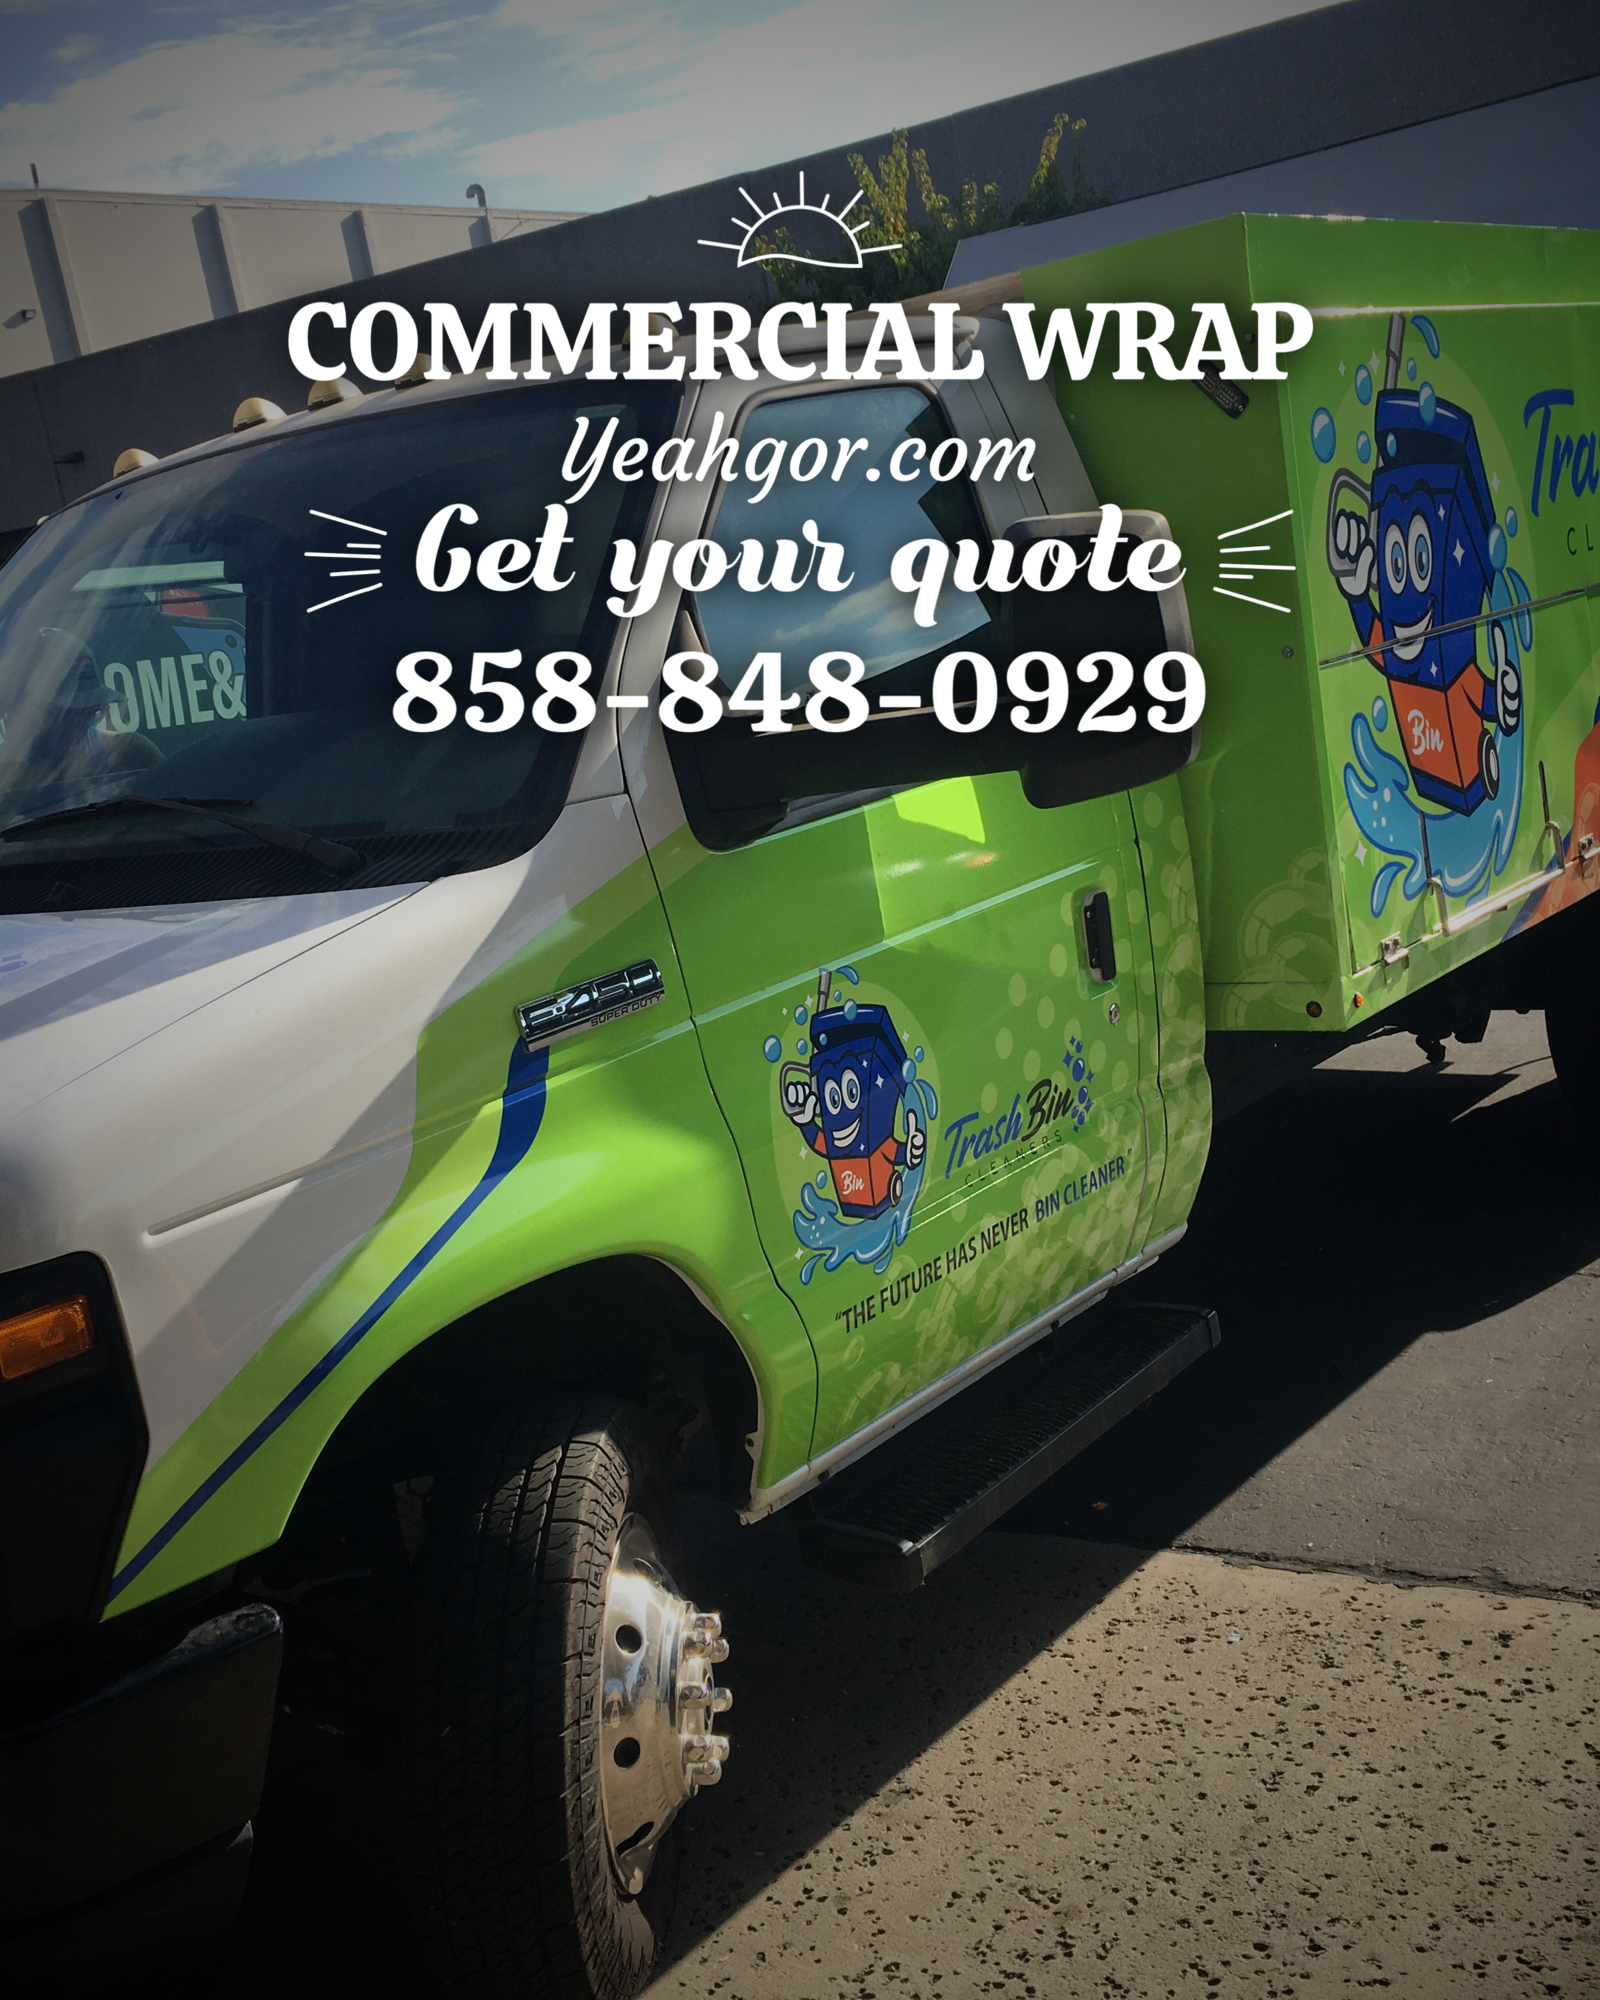 Santee, CA – Vehicle Graphics and Car Signage San Diego for Small Businesses DM for details We do the car signage and vinyl decals for cars, vans, trailers, and trucks.